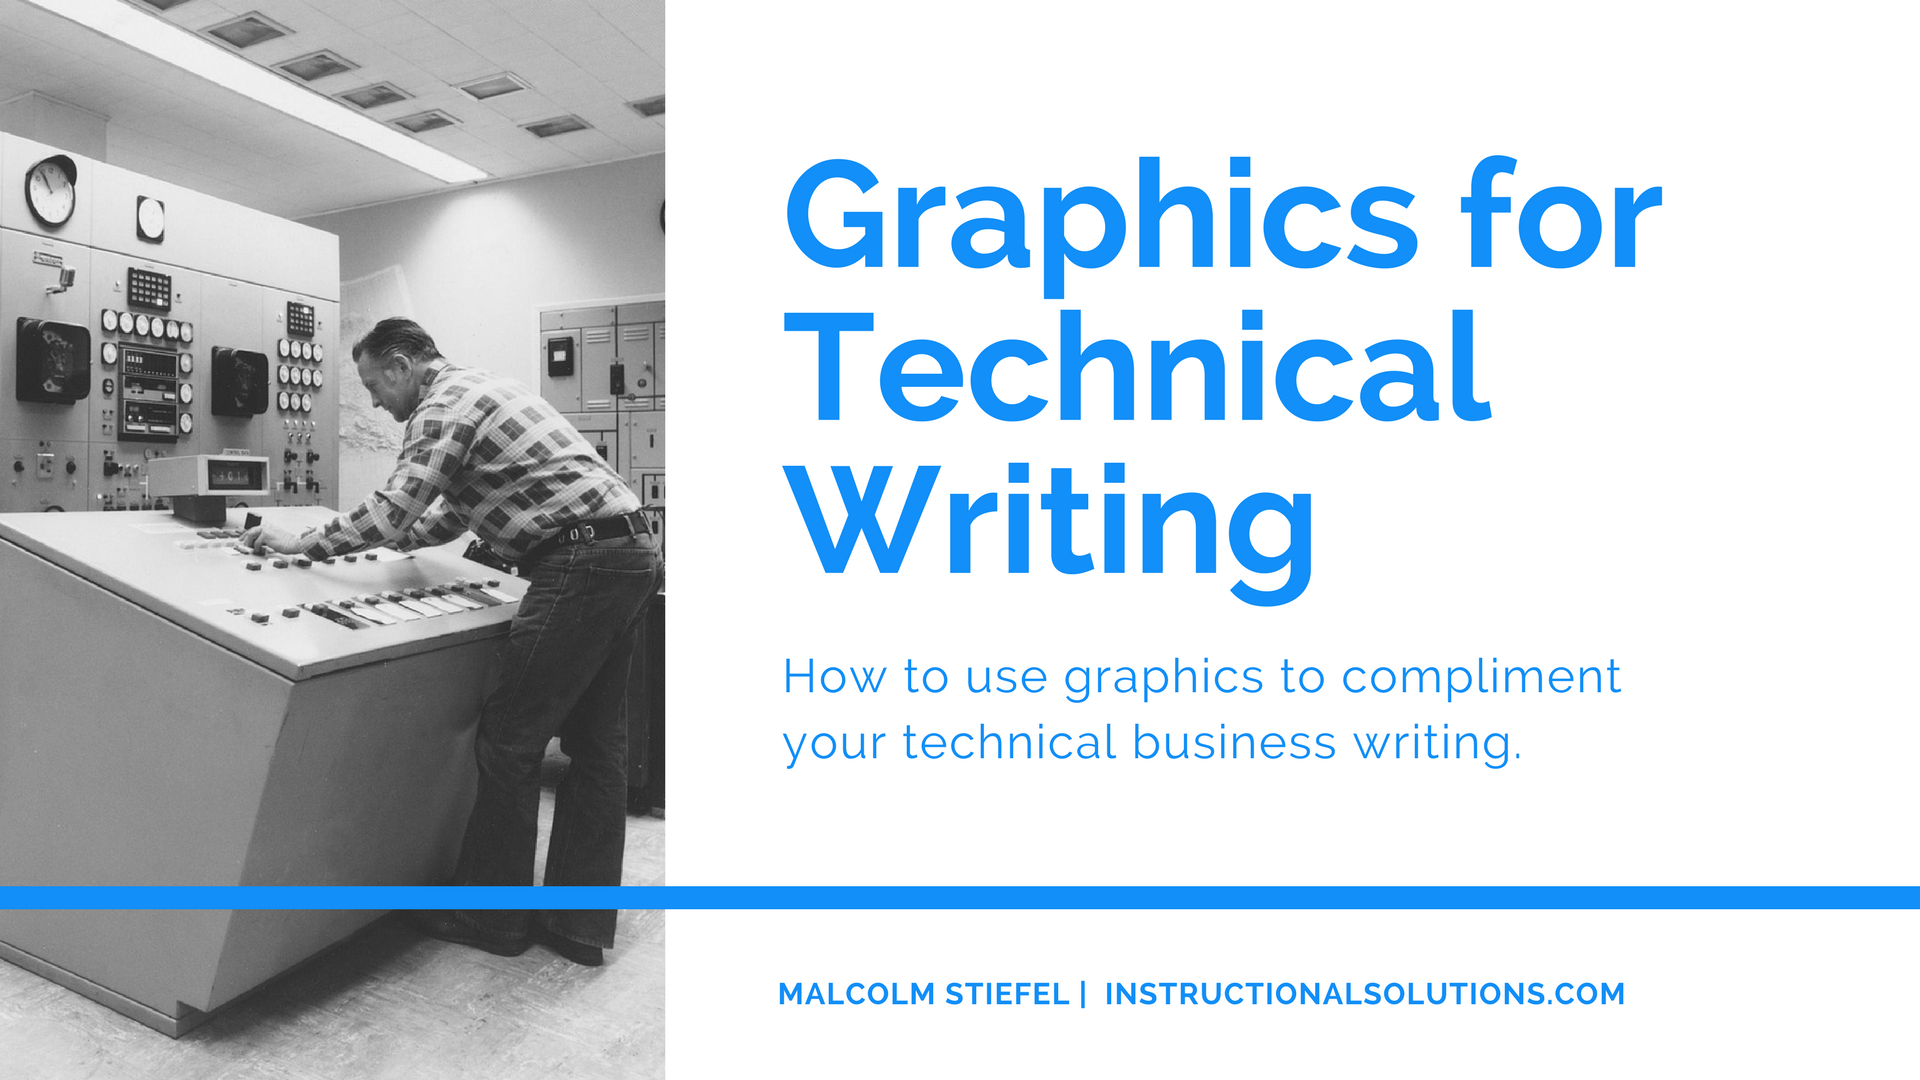 How to Use Graphics in Technical Writing